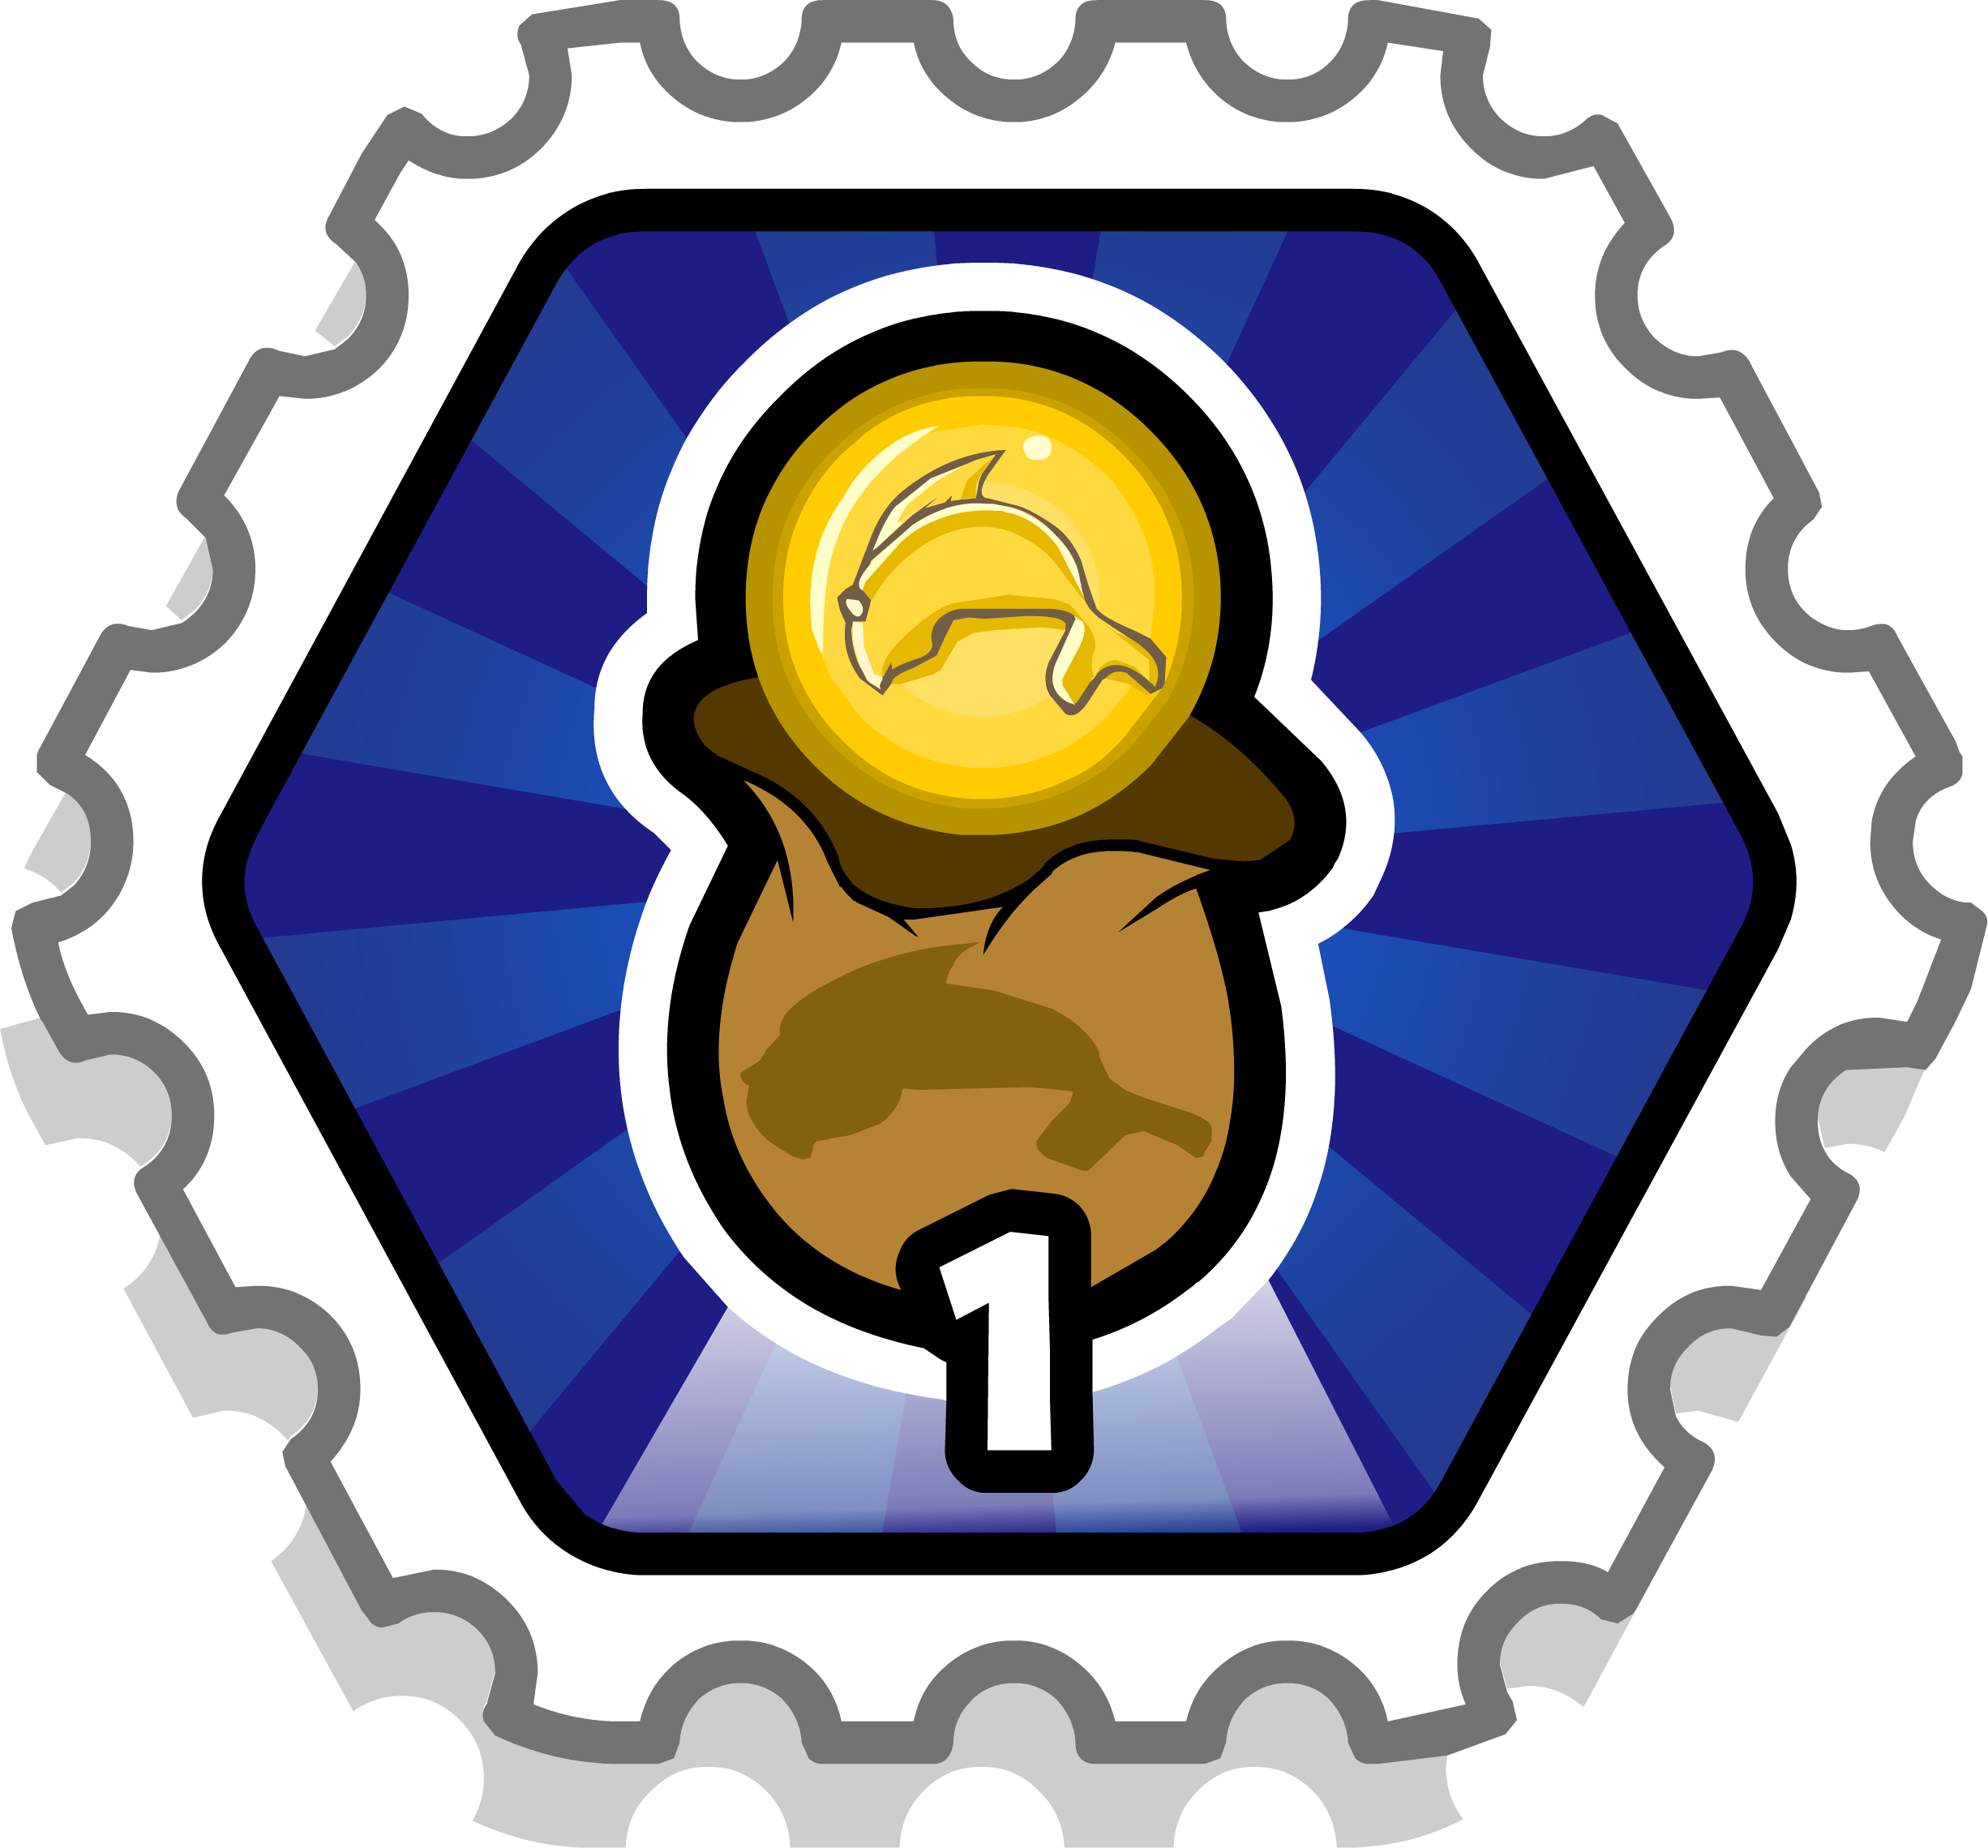 Cave Coins Max - Club Penguin Extreme Cannon Stamp (2452x2279)